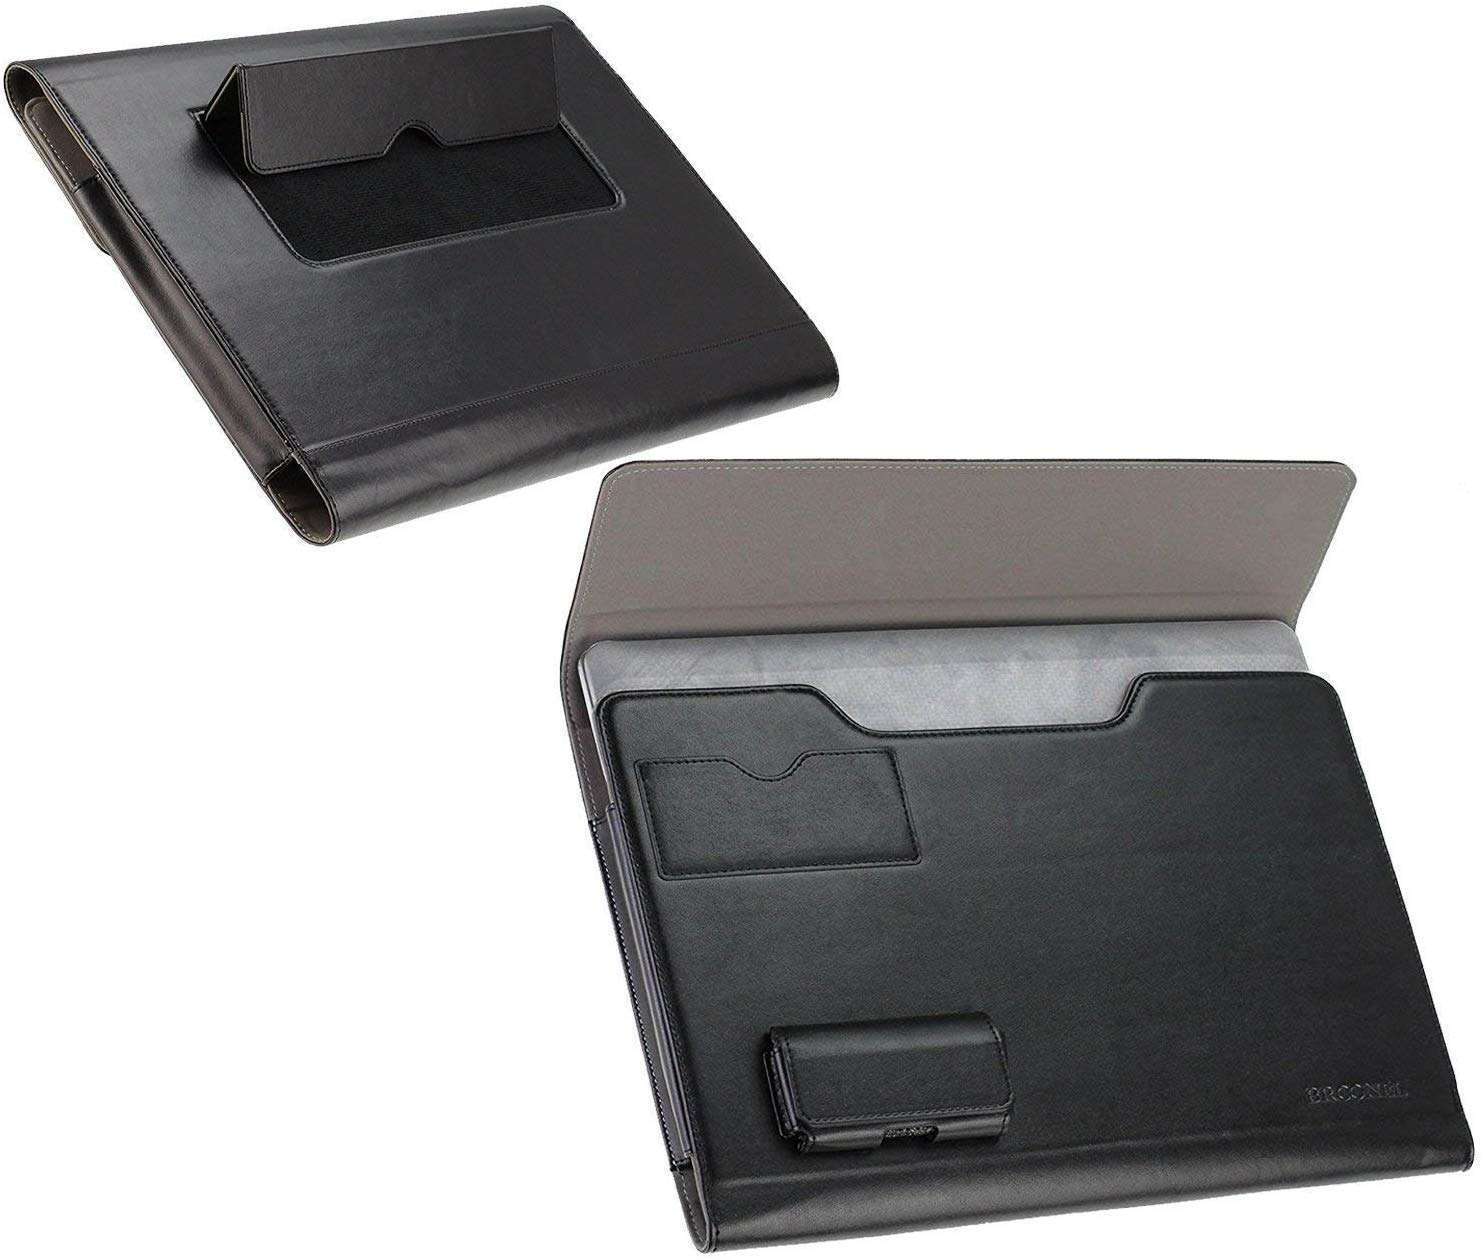 Broonel Leather Folio Case the HUION Graphics Tablet HS64